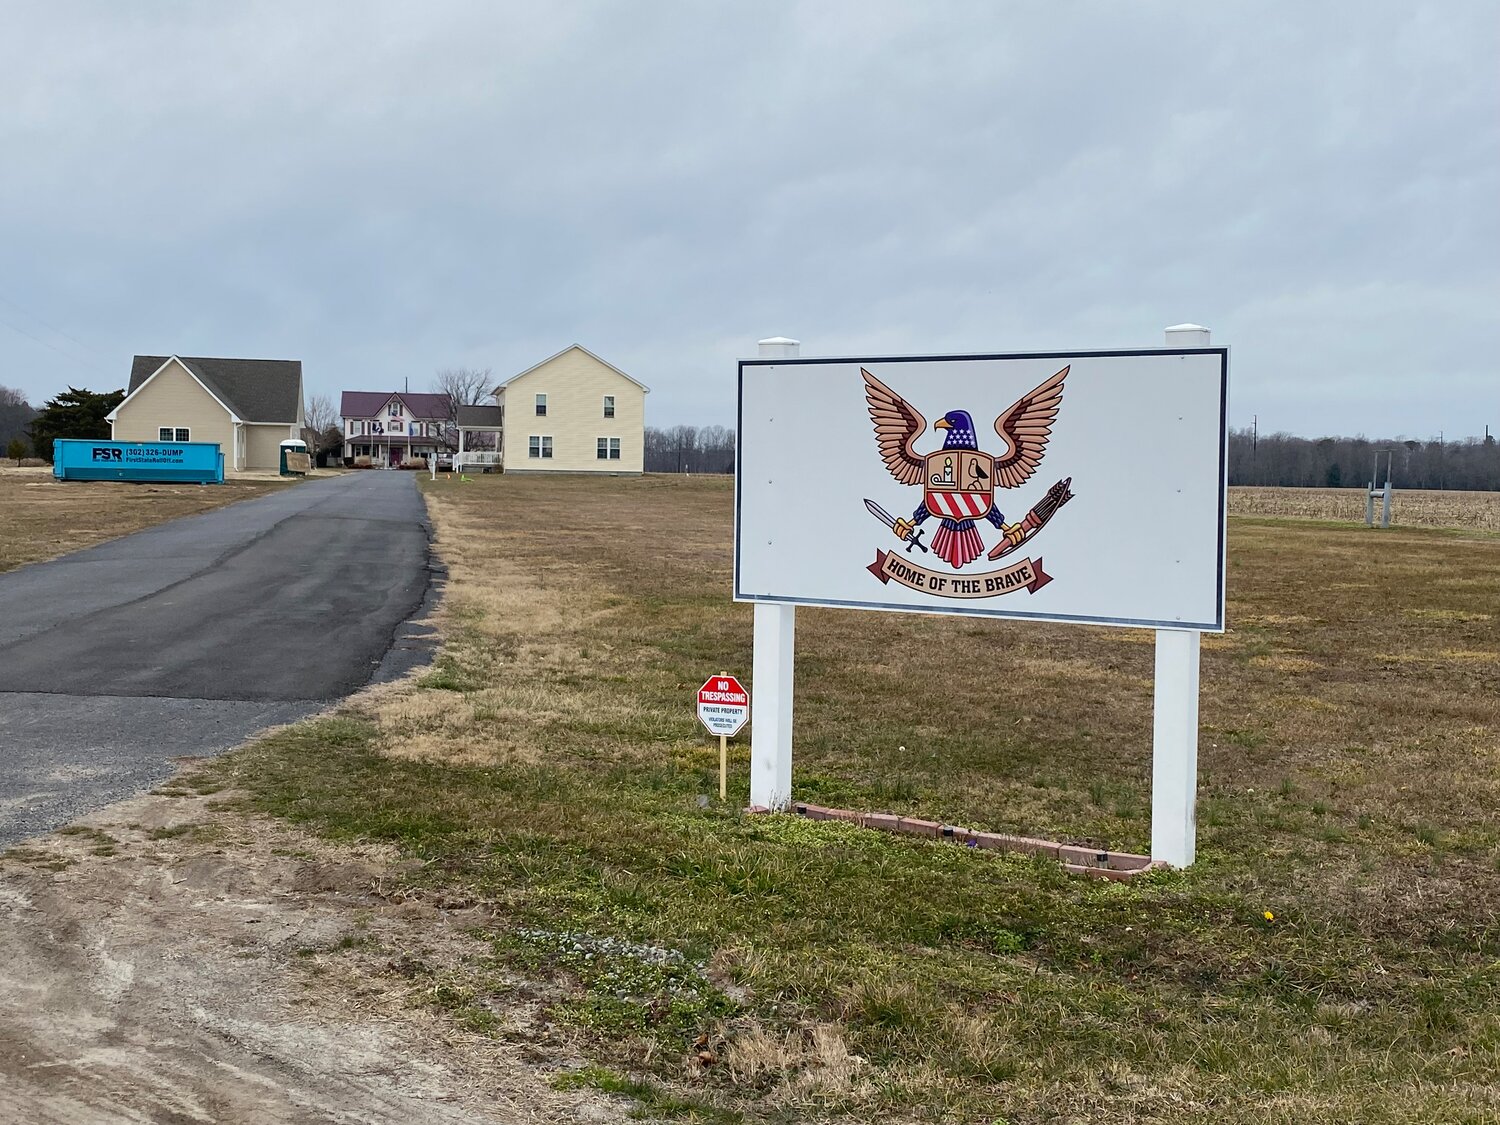 Home of the Brave in Milford is about a half-mile from Del. 1 and even farther to services like doctor’s offices and jobs. Its homeless tenants are often without rides and in need of transportation, according to resident Daniel Young.